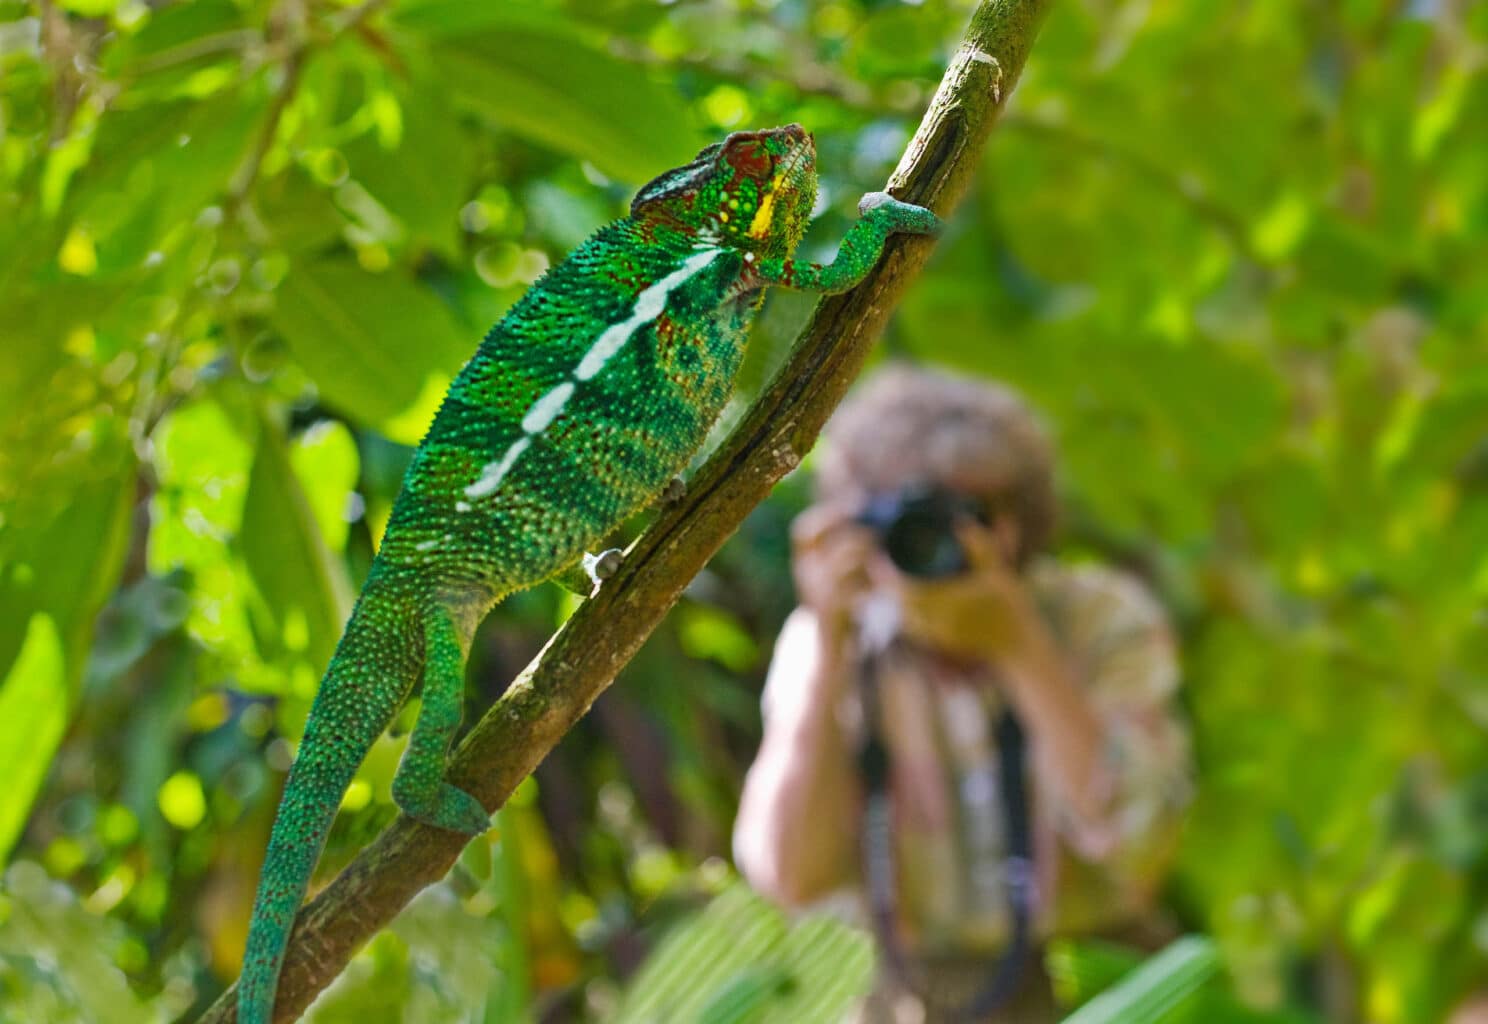 A person photographing a chameleon in a tree.